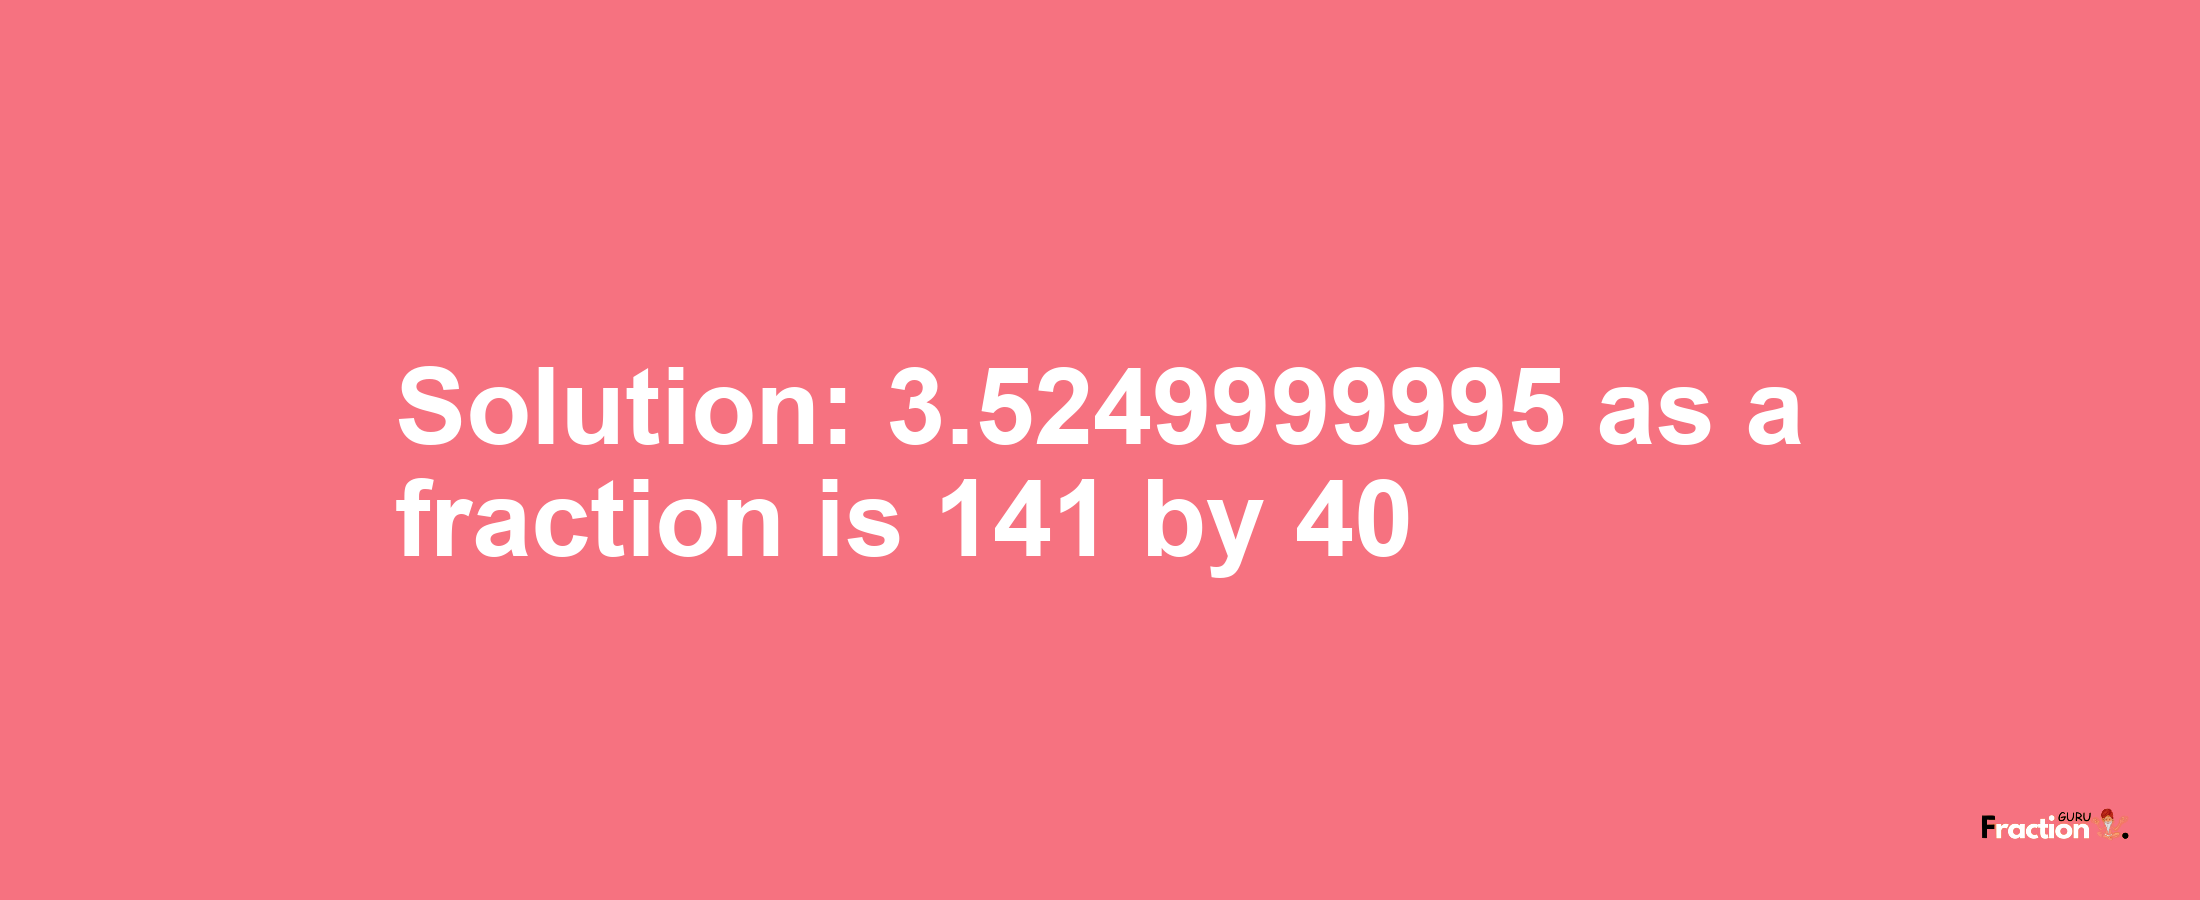 Solution:3.5249999995 as a fraction is 141/40